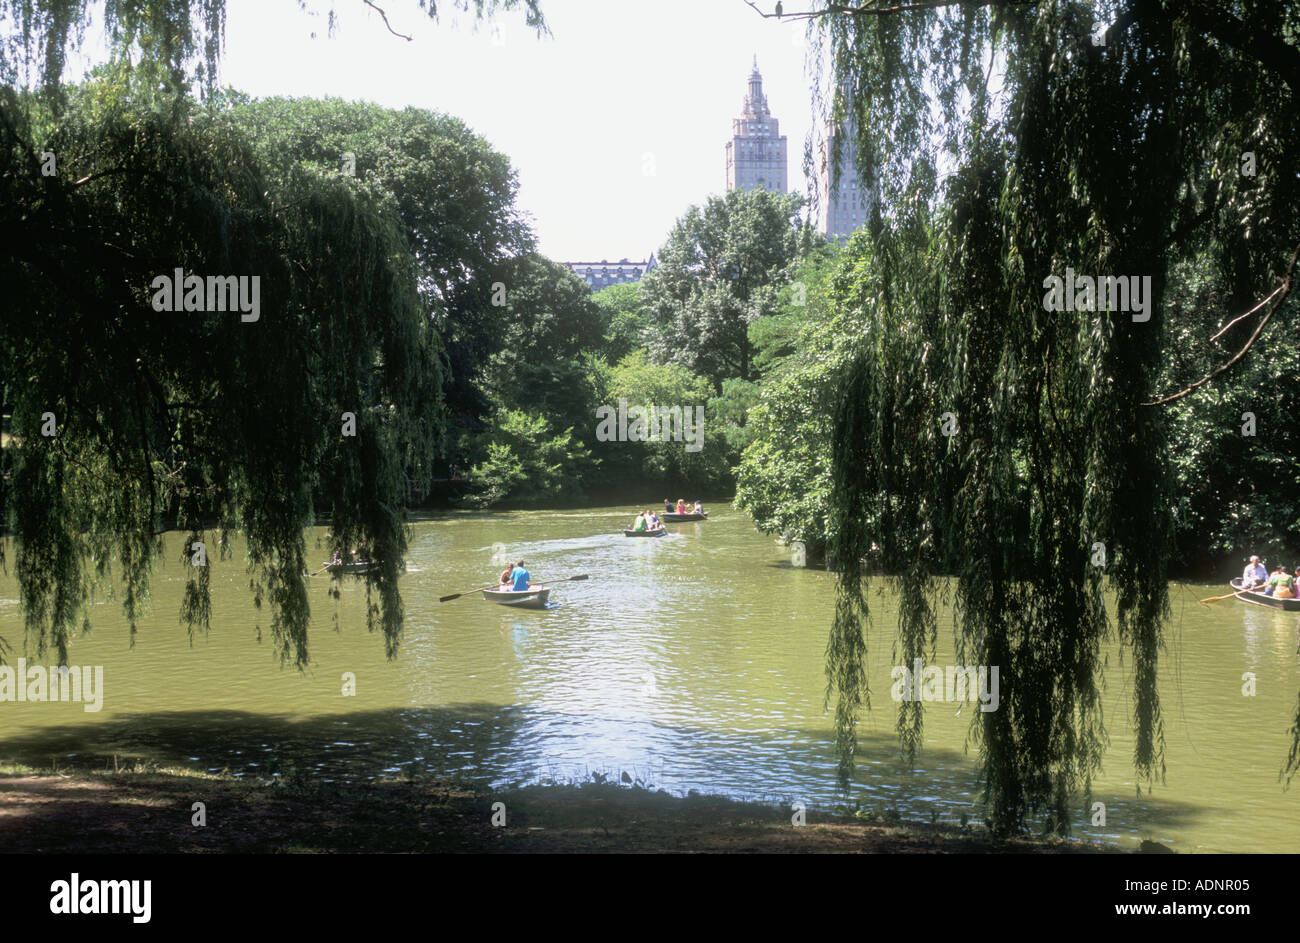 People Boating Central Park Lake New York City NYC USA Stock Photo